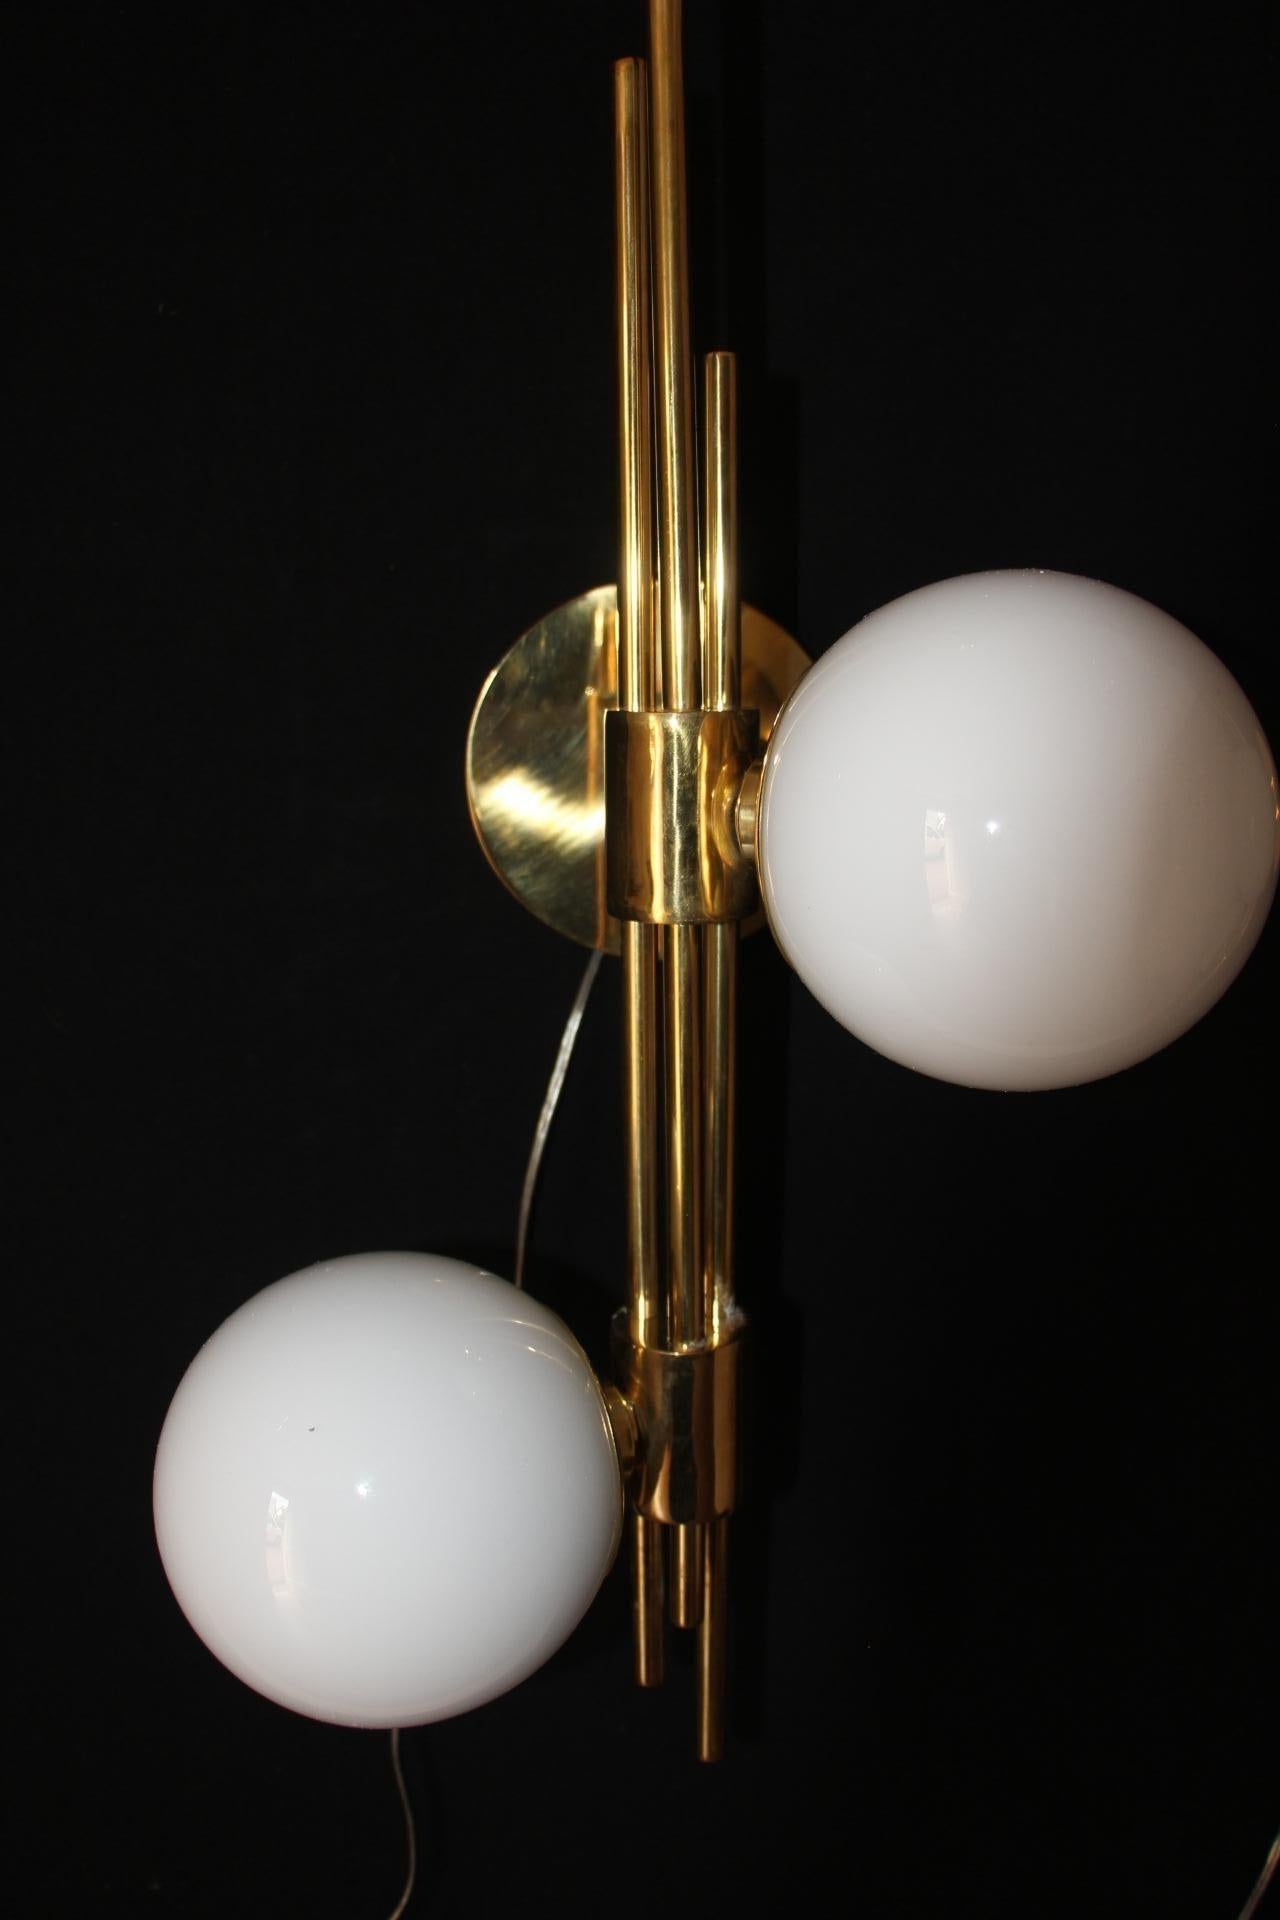 20th Century Modern Pair of Brass and White Glass Sconces, Stilnovo Style Wall Lights For Sale